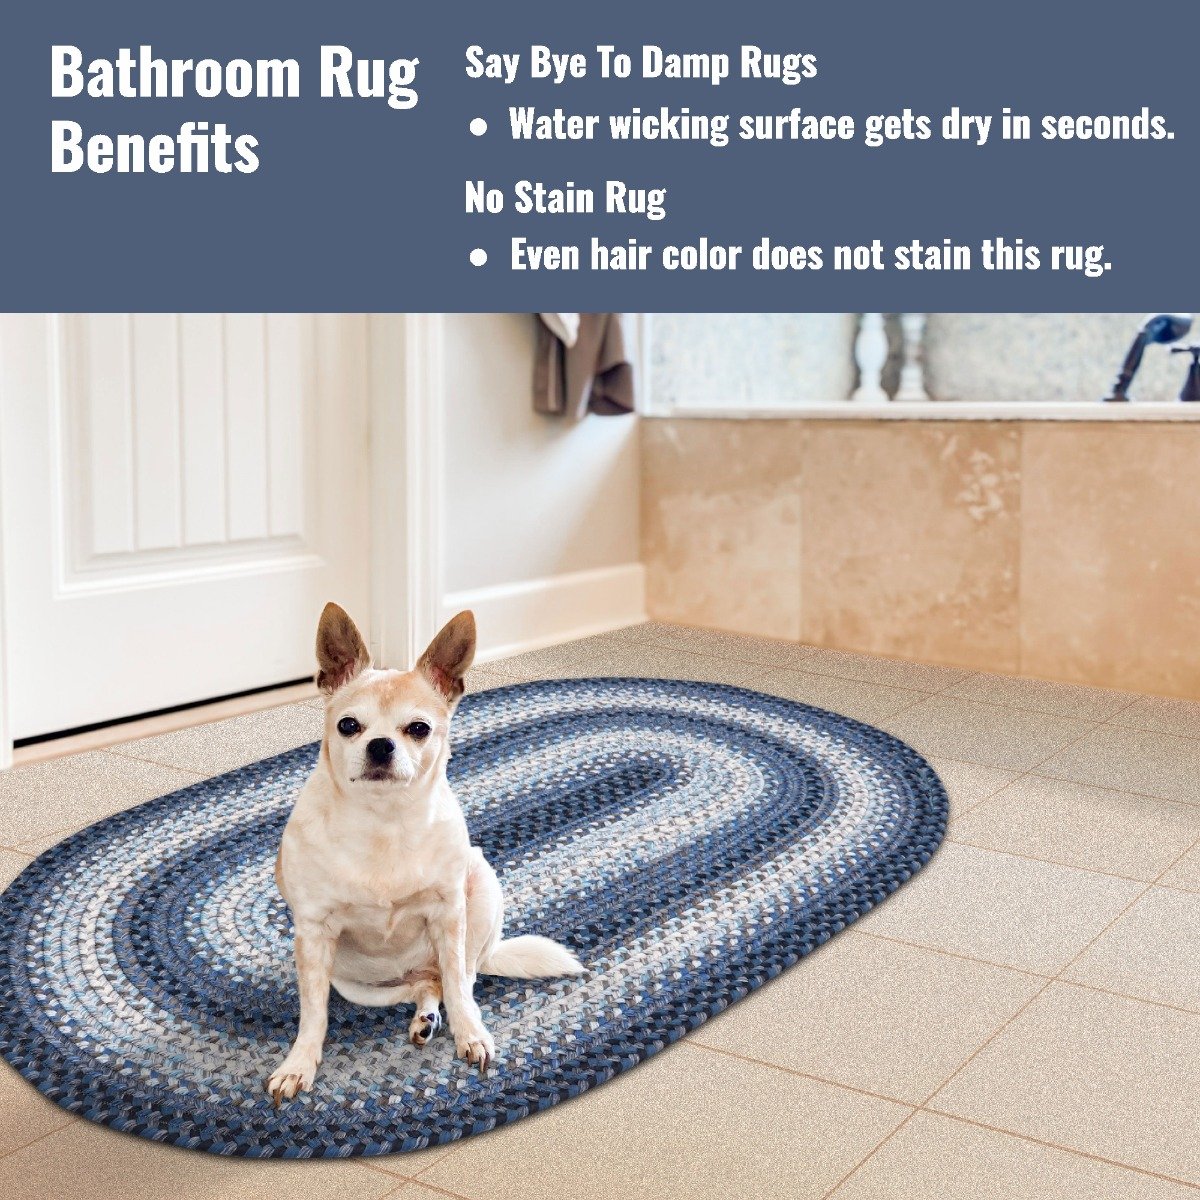 Juniper Blue Ultra Durable Small Braided Oval Rugs In Set